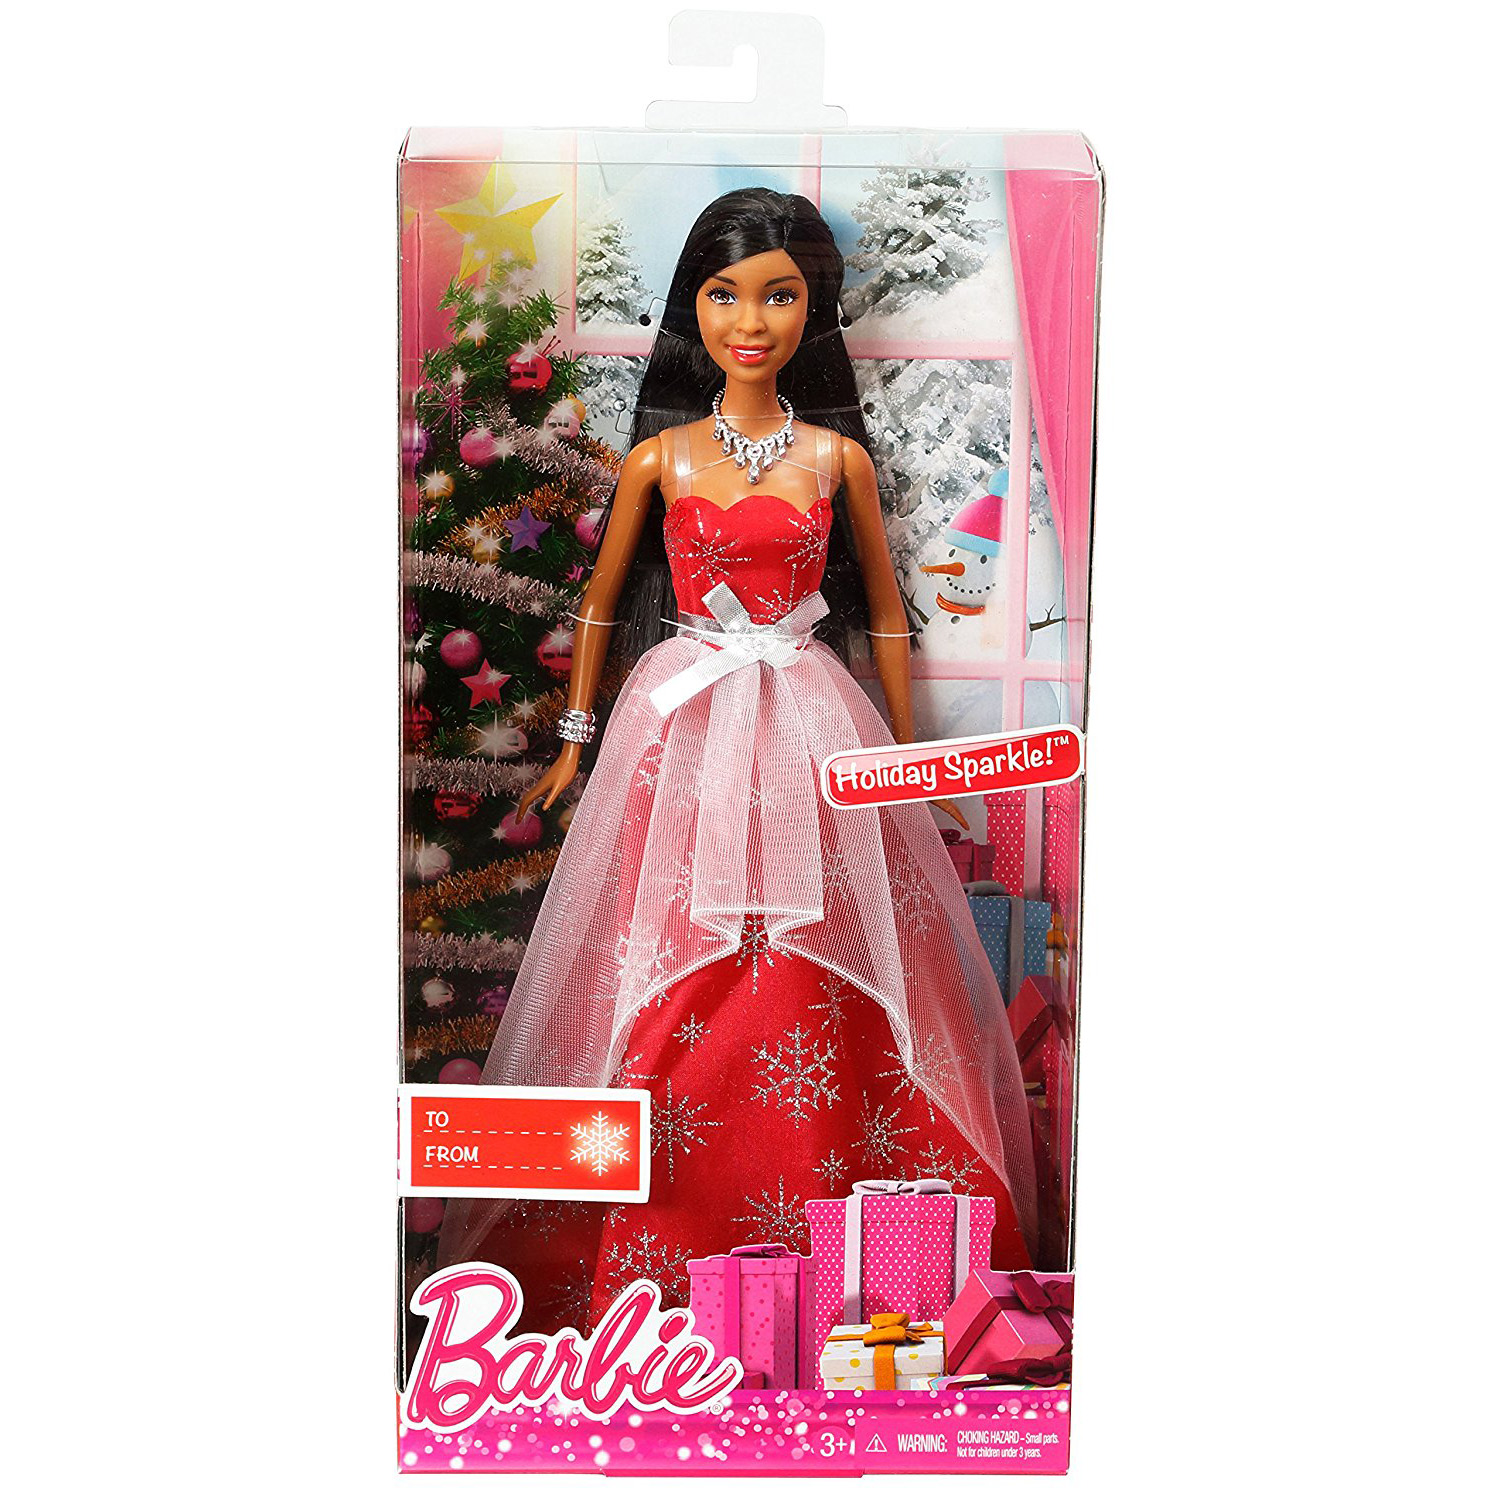 Barbie 2015 Christmas Holiday Collection Sparkle African-American Doll